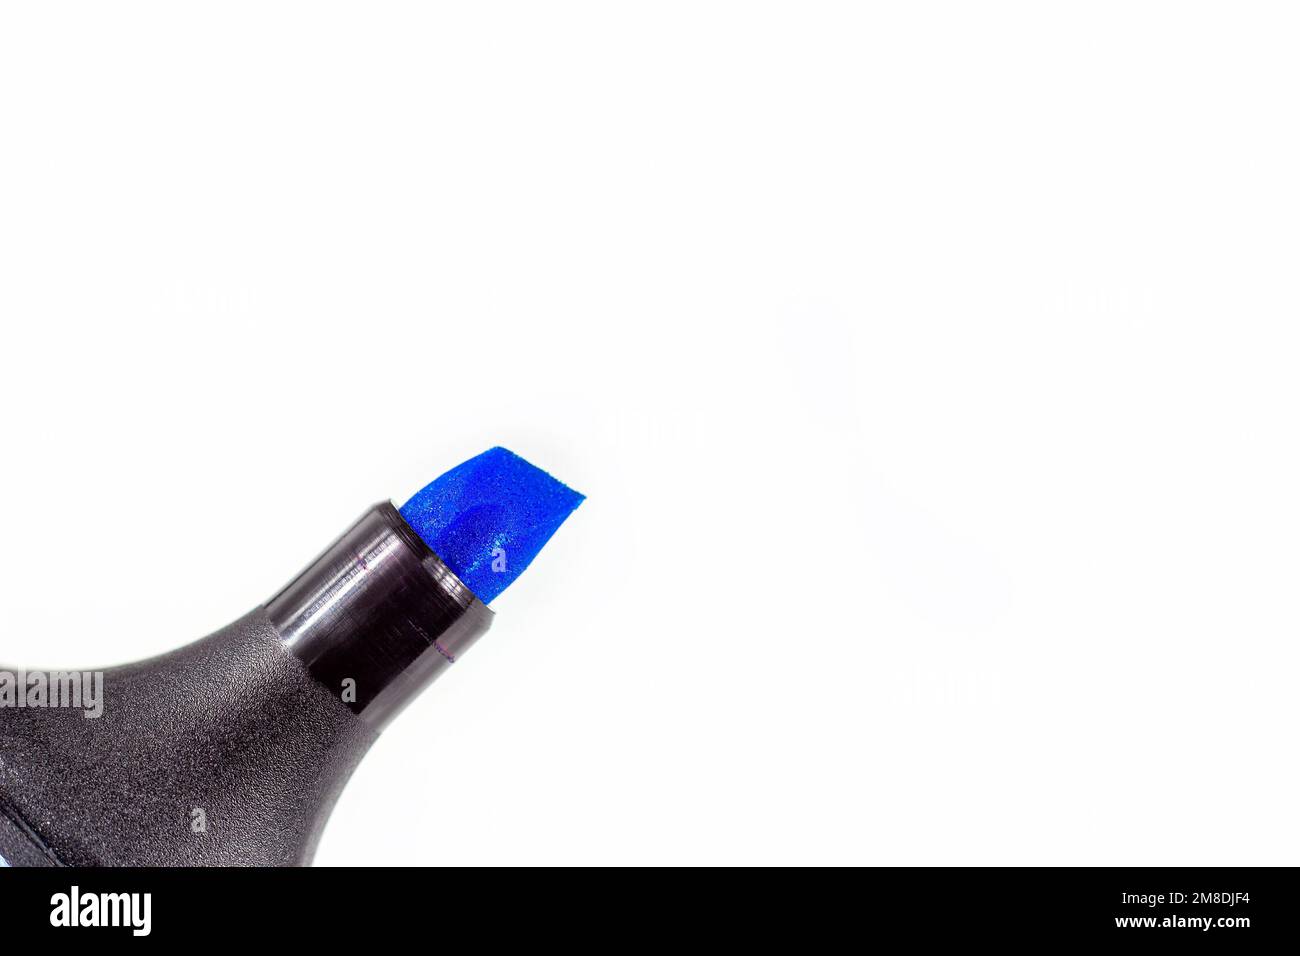 Black marker pen with bright blue tip on light background close up with copy space. Stock Photo